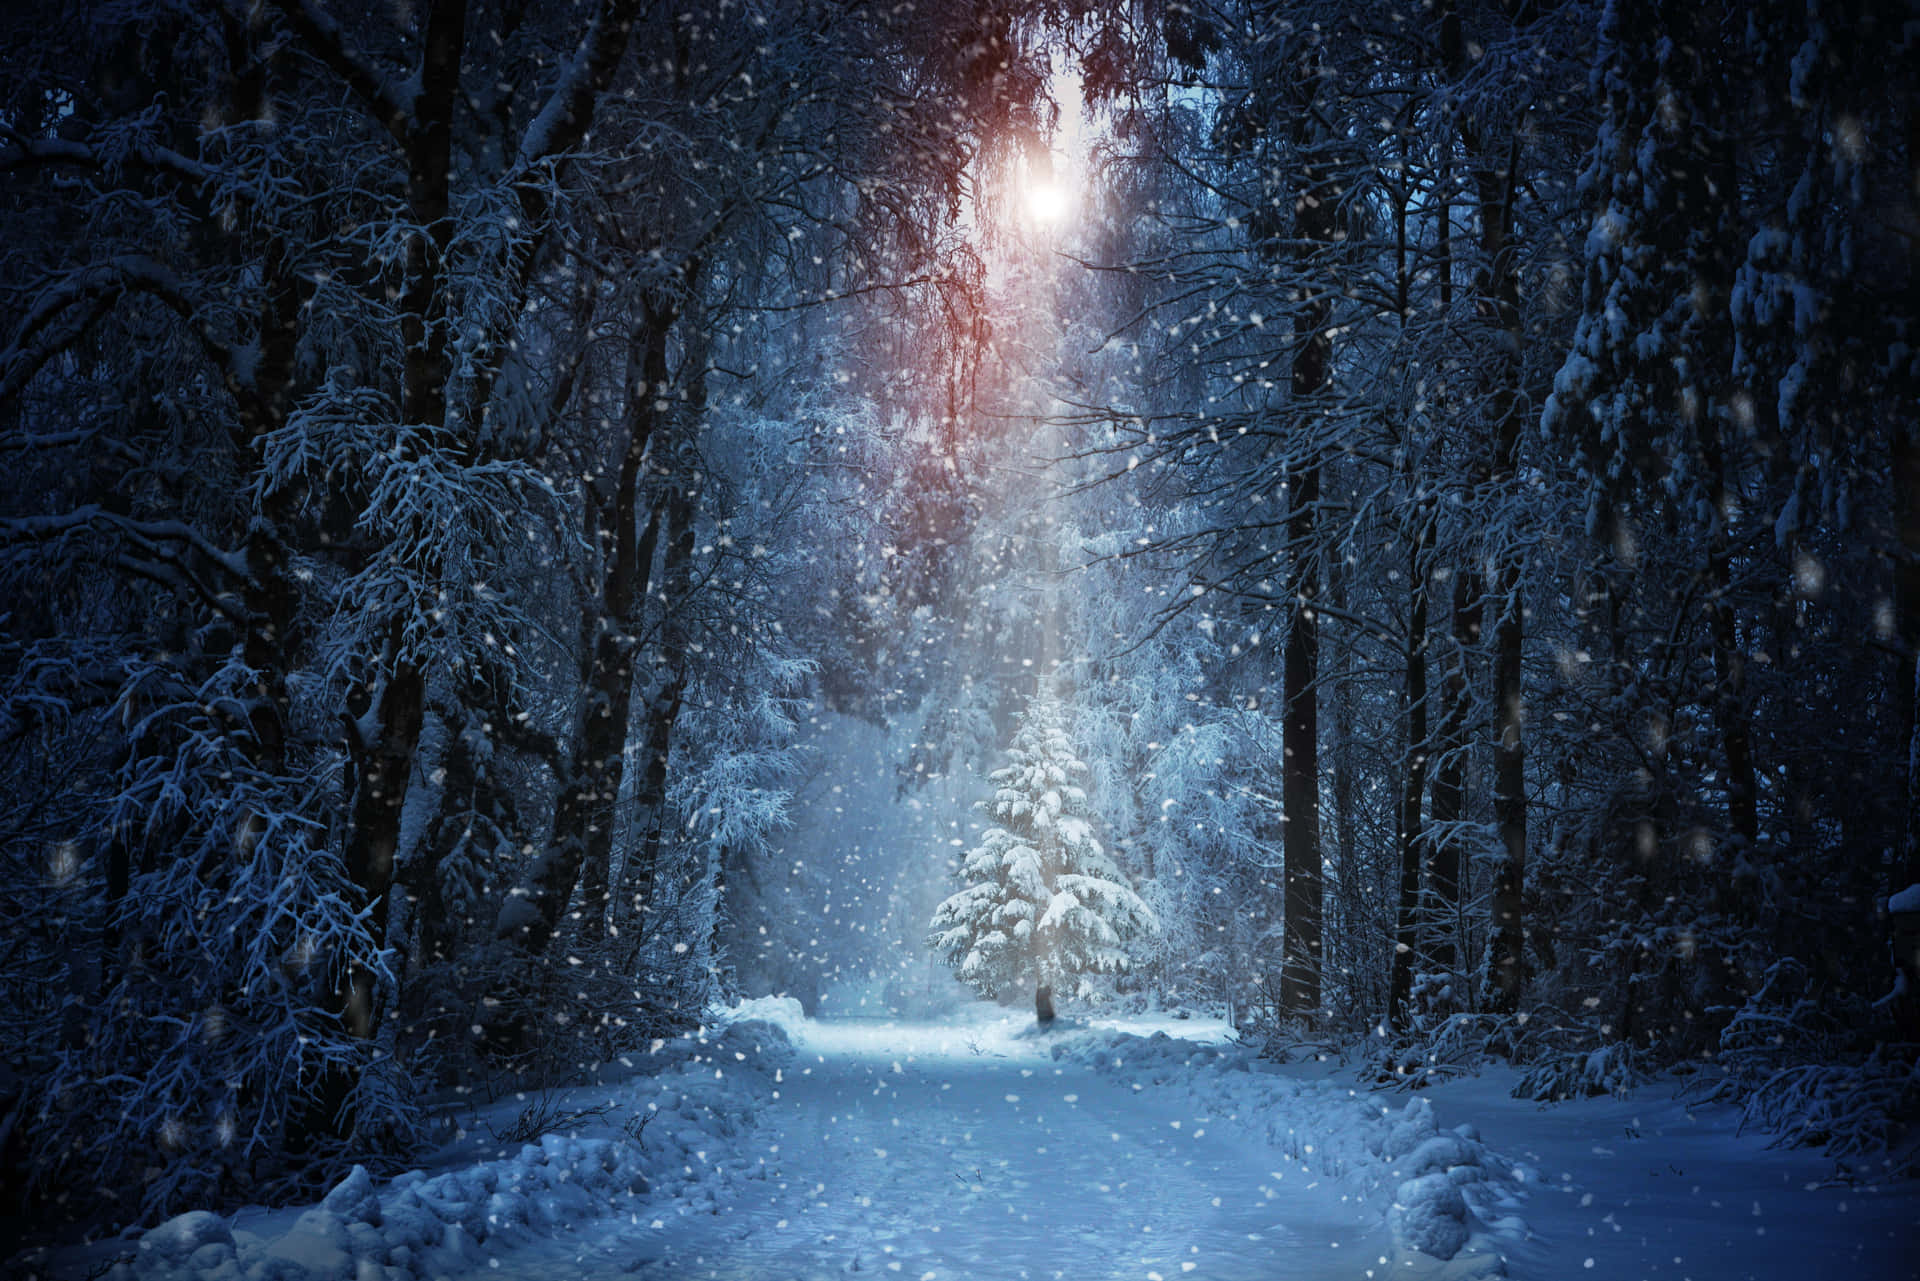 A Snowy Forest With A Christmas Tree In The Middle Wallpaper